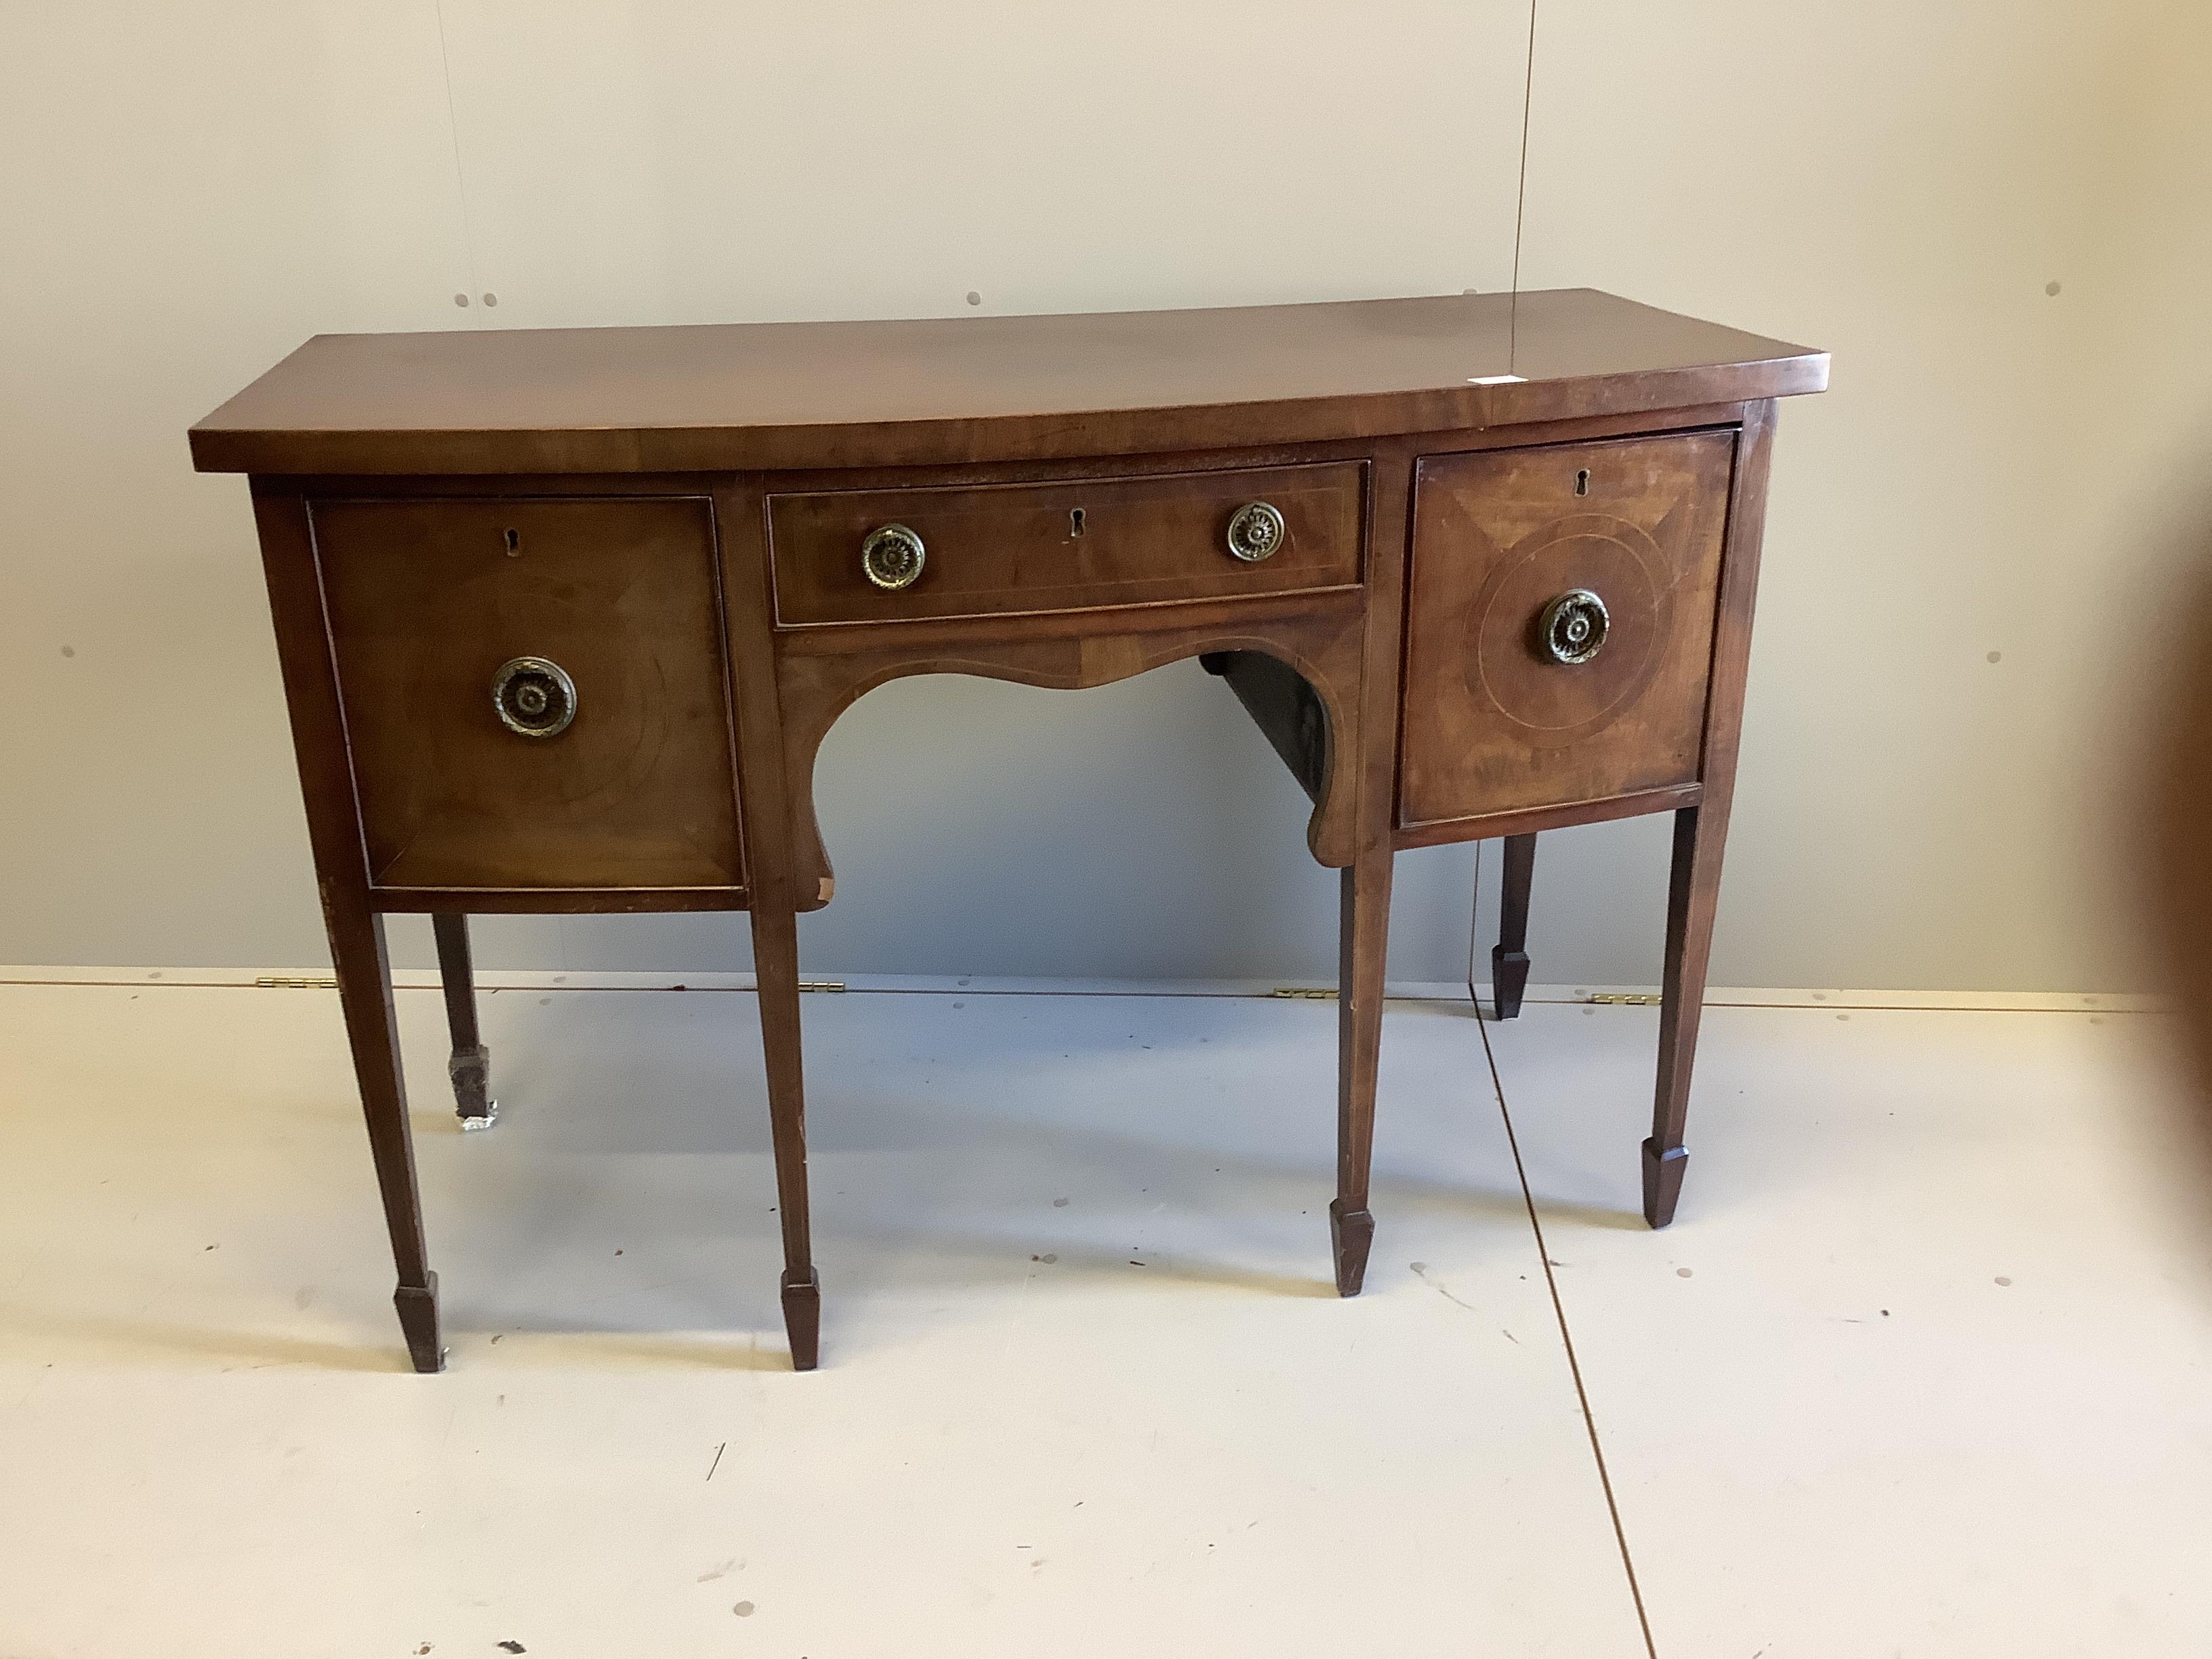 A George III style mahogany bowfront sideboard, width 137cm, depth 66cm, height 91cm